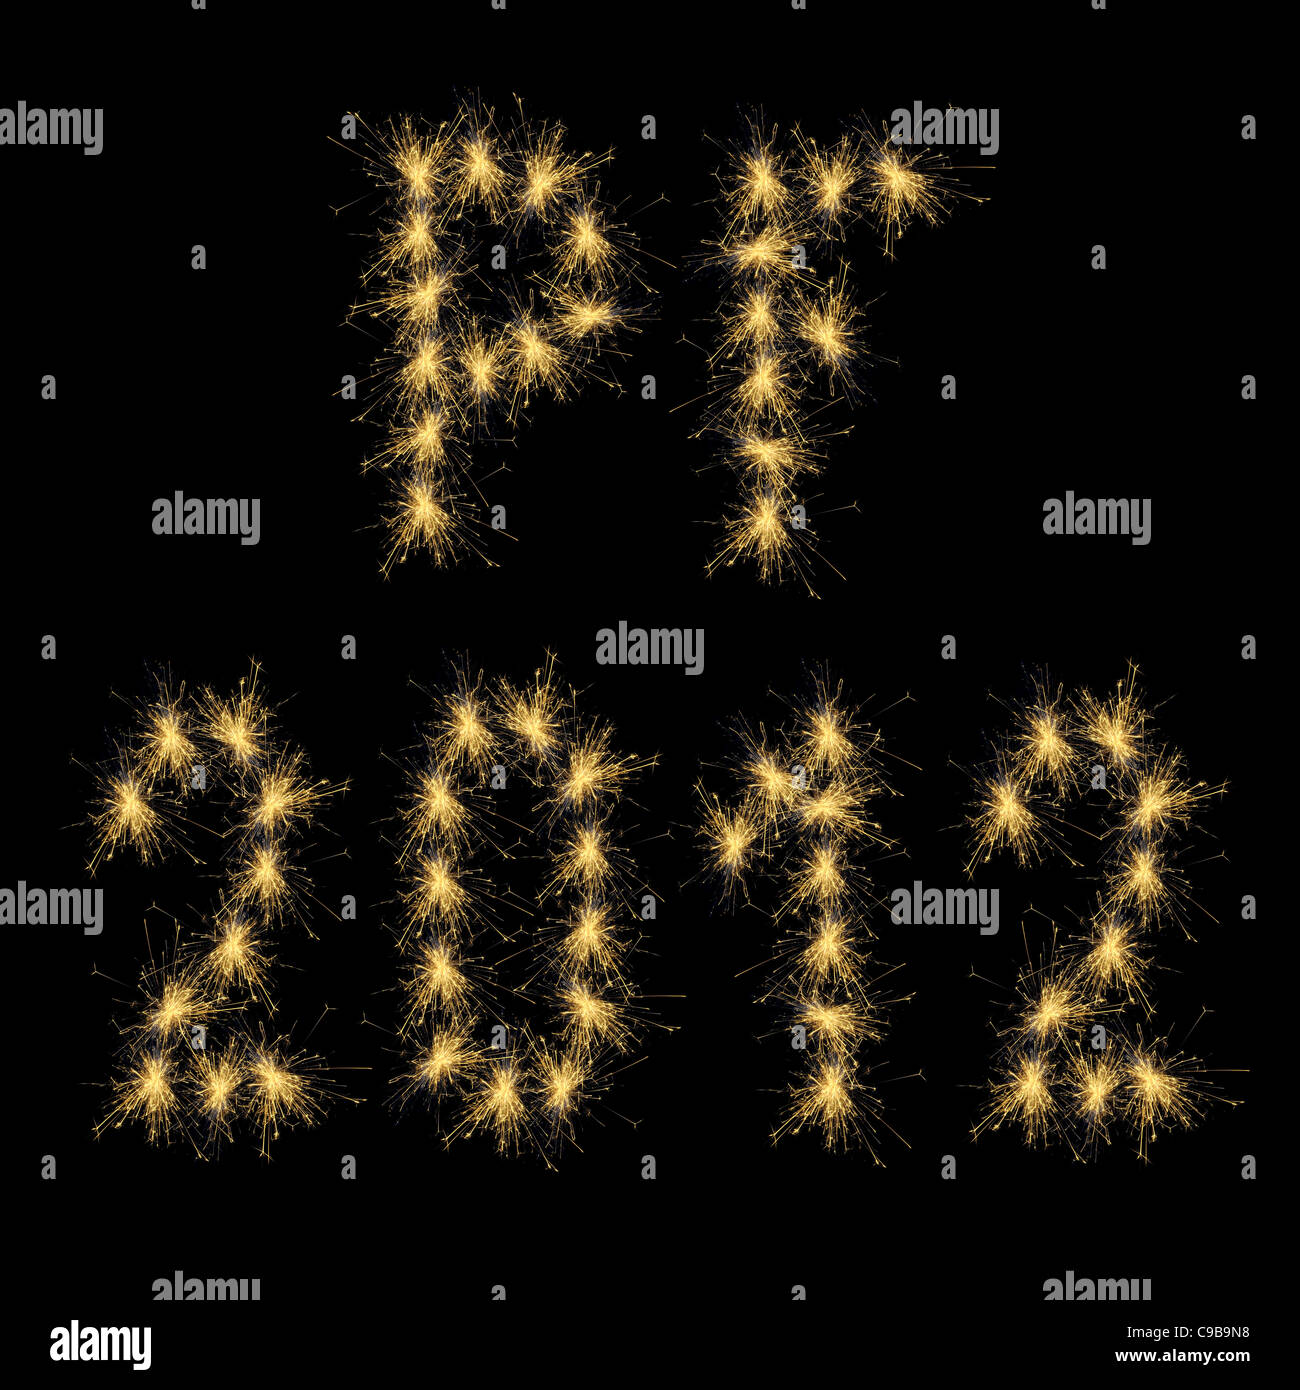 The Season's greetings (PF) with year 2012 shaped by fire sparks on black background. Stock Photo